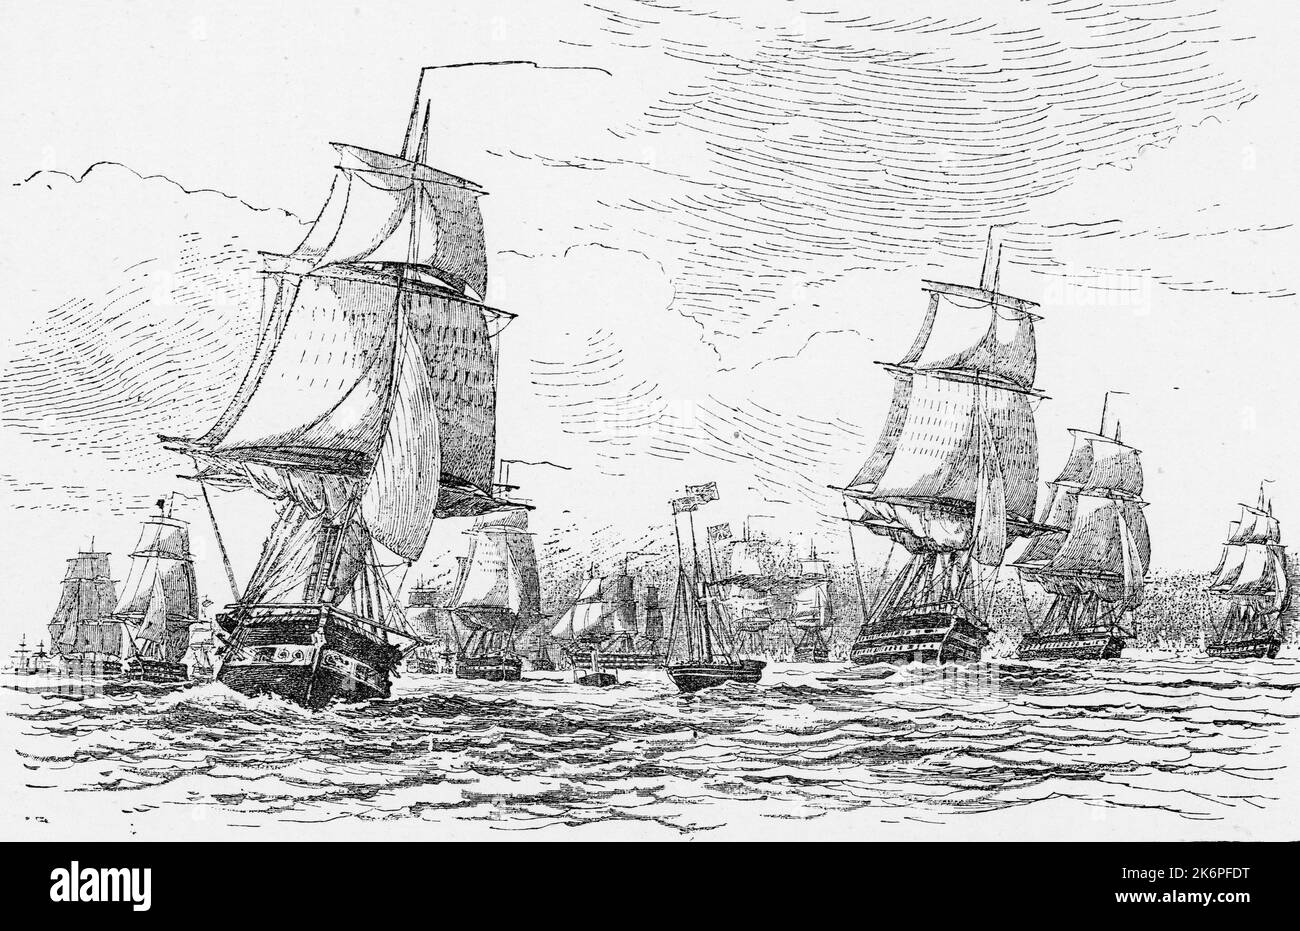 The fleet sailing from Spithead, 11 March 1854. After Edward Duncan (1803-1882). As the Crimean War grew closer, a fleet of Royal Navy ships assembled at Spithead on the Solent to depart for the Baltic Sea. They were to prevent Russia’s Northern Fleet from entering the North Sea and threatening Britain. Queen Victoria watched the ships depart, on board the yacht Fairy, seen here in the centre foreground flying the Royal Standard. The ships included the Royal George (left foreground) and St Jean d’Acre (leading the fleet to the right). Stock Photo